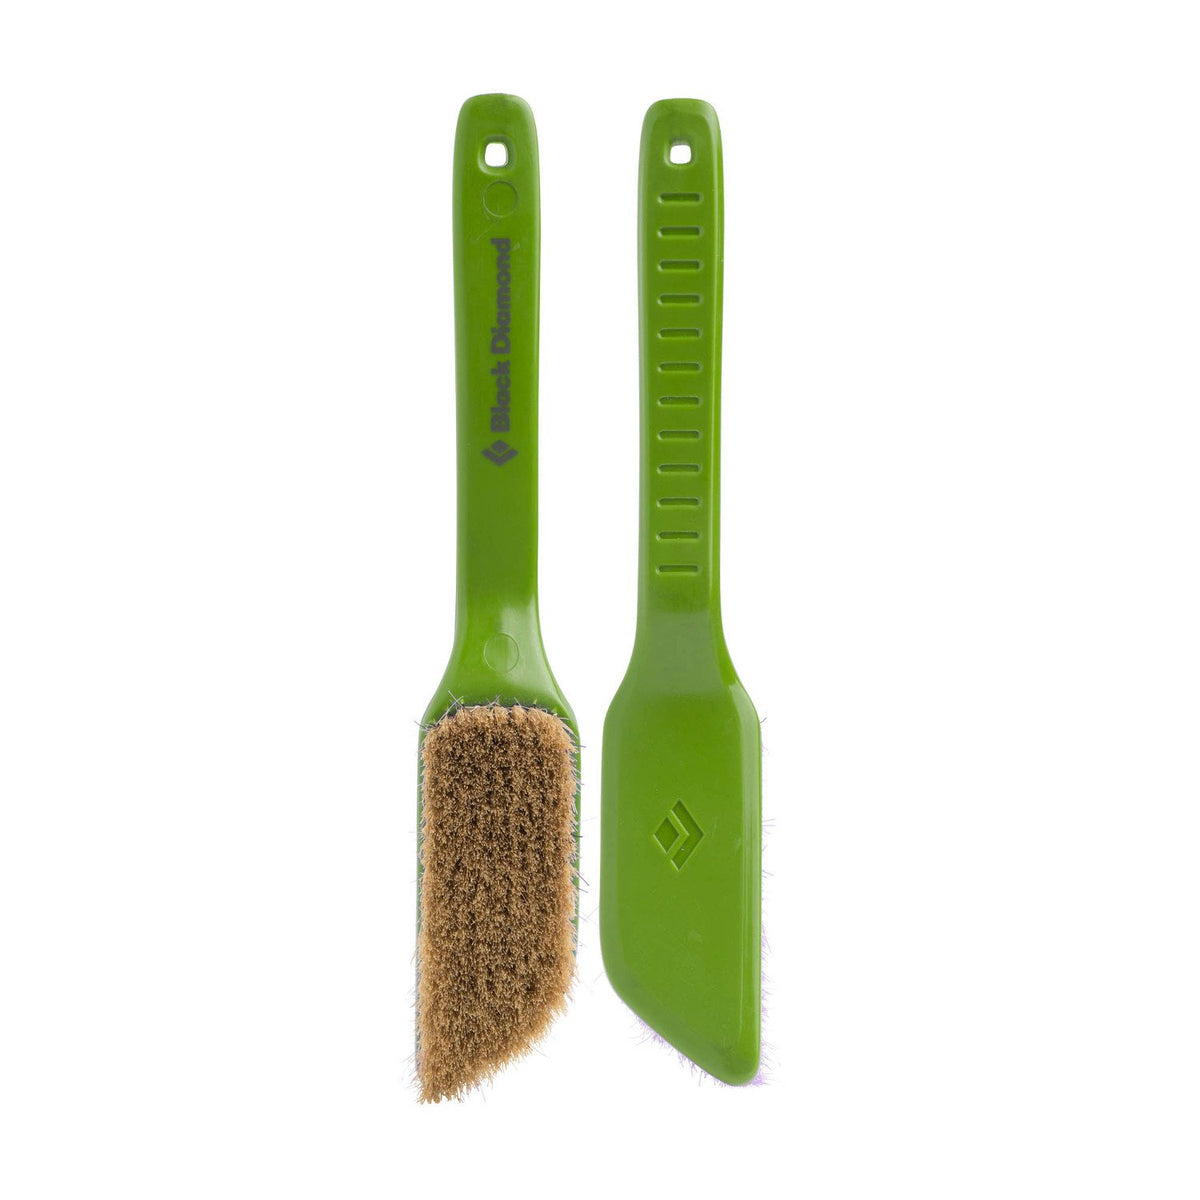 Pair of green Black Diamond Boars Hair Brushes - Medium, 1 shown facing and 1 shown in the reverse